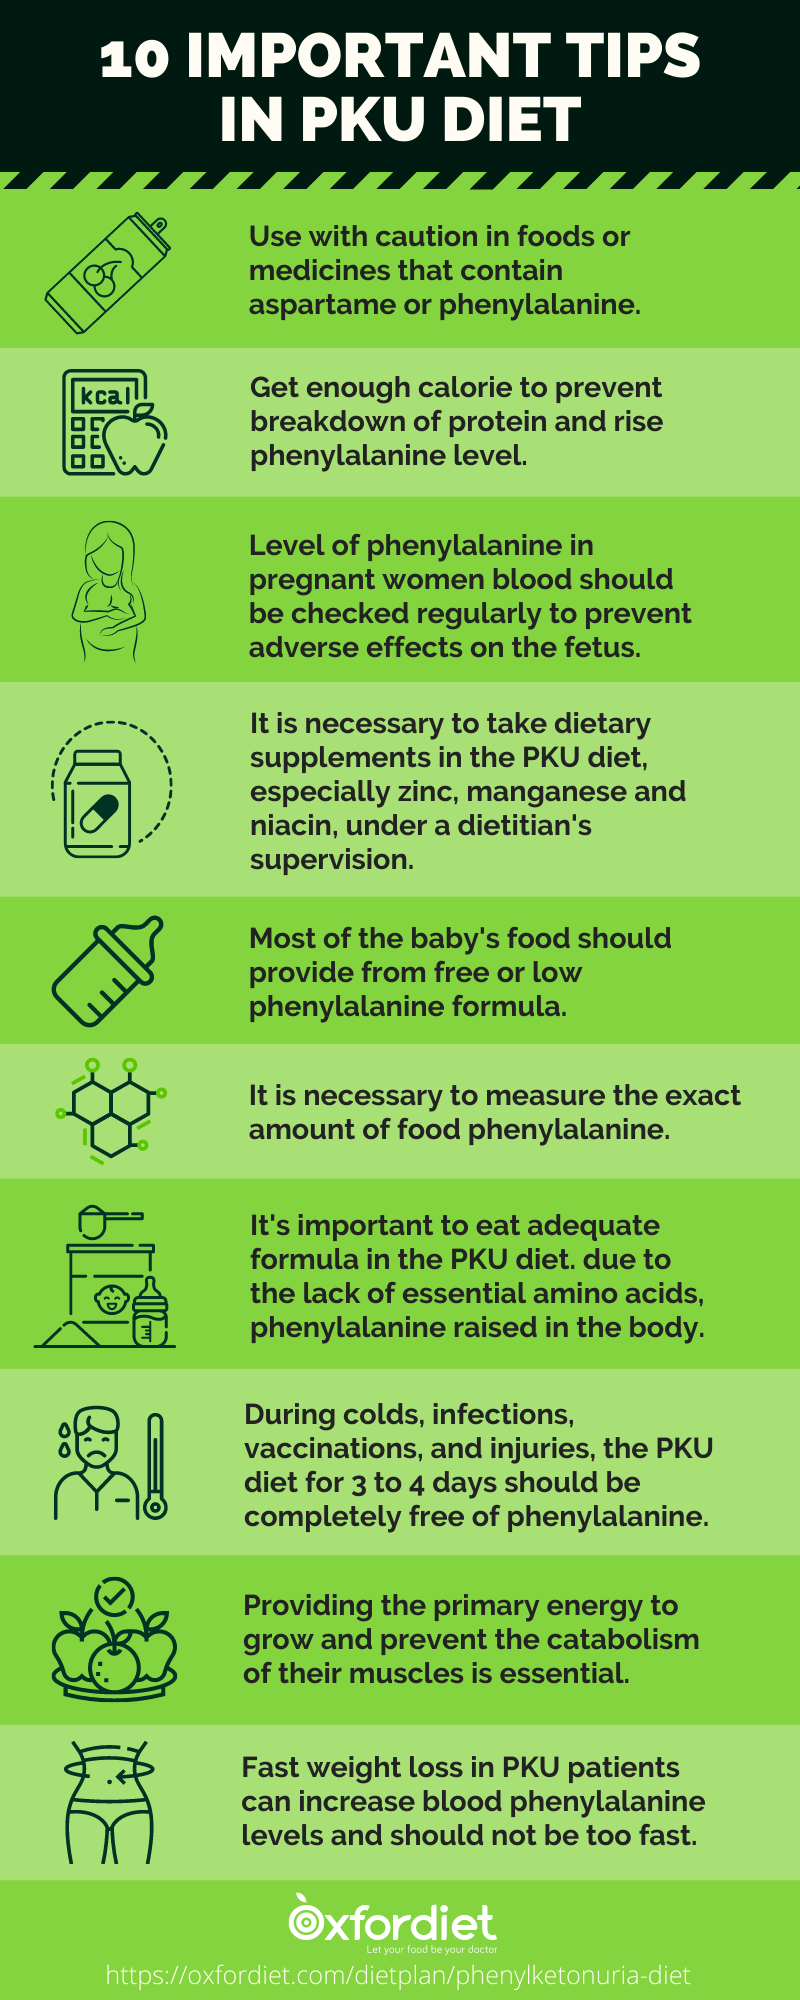 10 important tips in pku diet